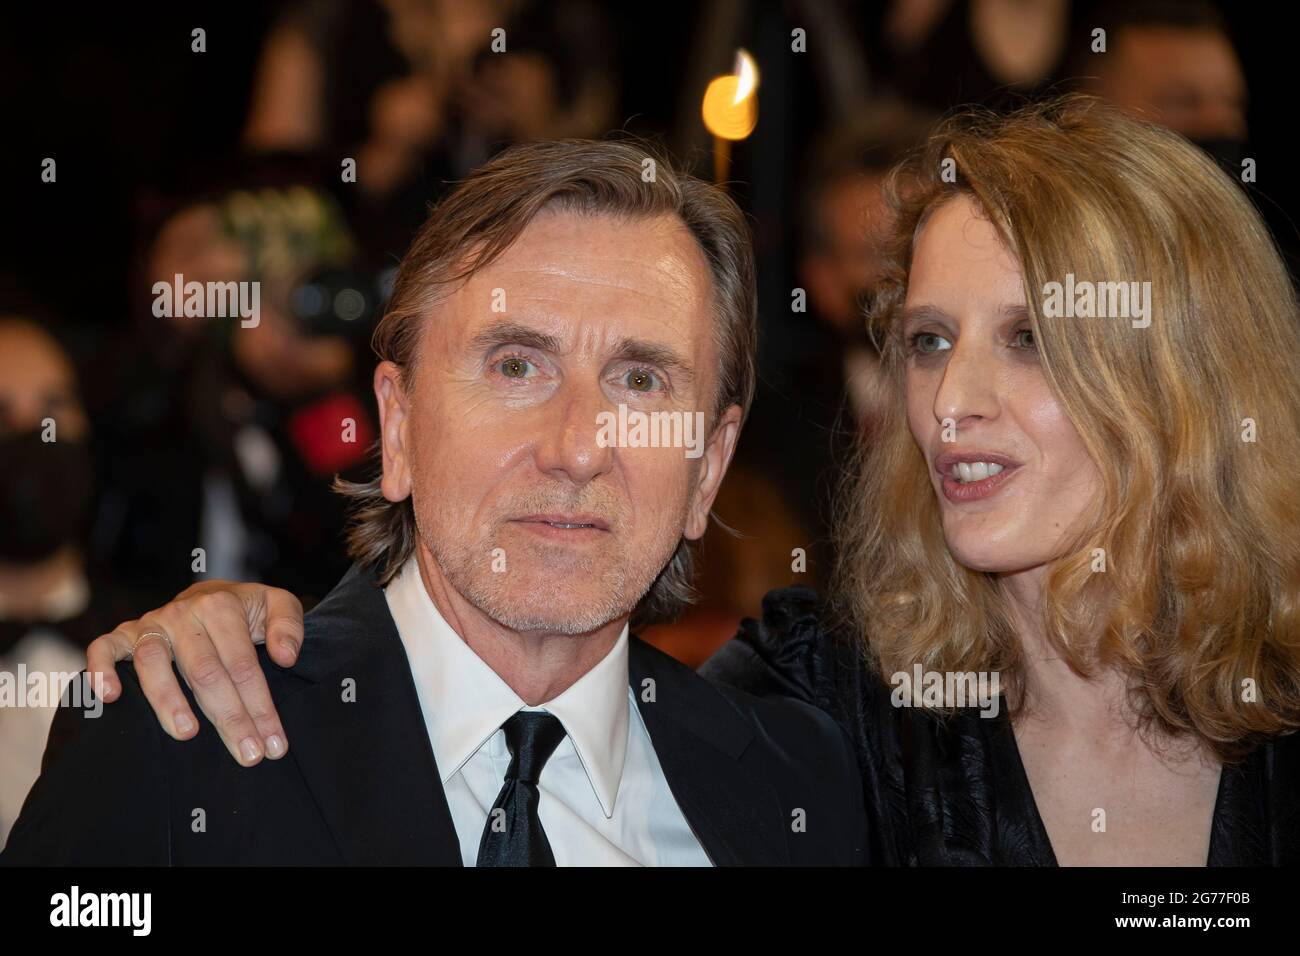 Cannes, France. 11th July, 2021. Tim Roth and Mia Hansen-Love attend the 'Bergman Island' screening during the 74th annual Cannes Film Festival on July 11, 2021 in Cannes, France. Franck Bonham/imageSPACE Credit: Imagespace/Alamy Live News Stock Photo